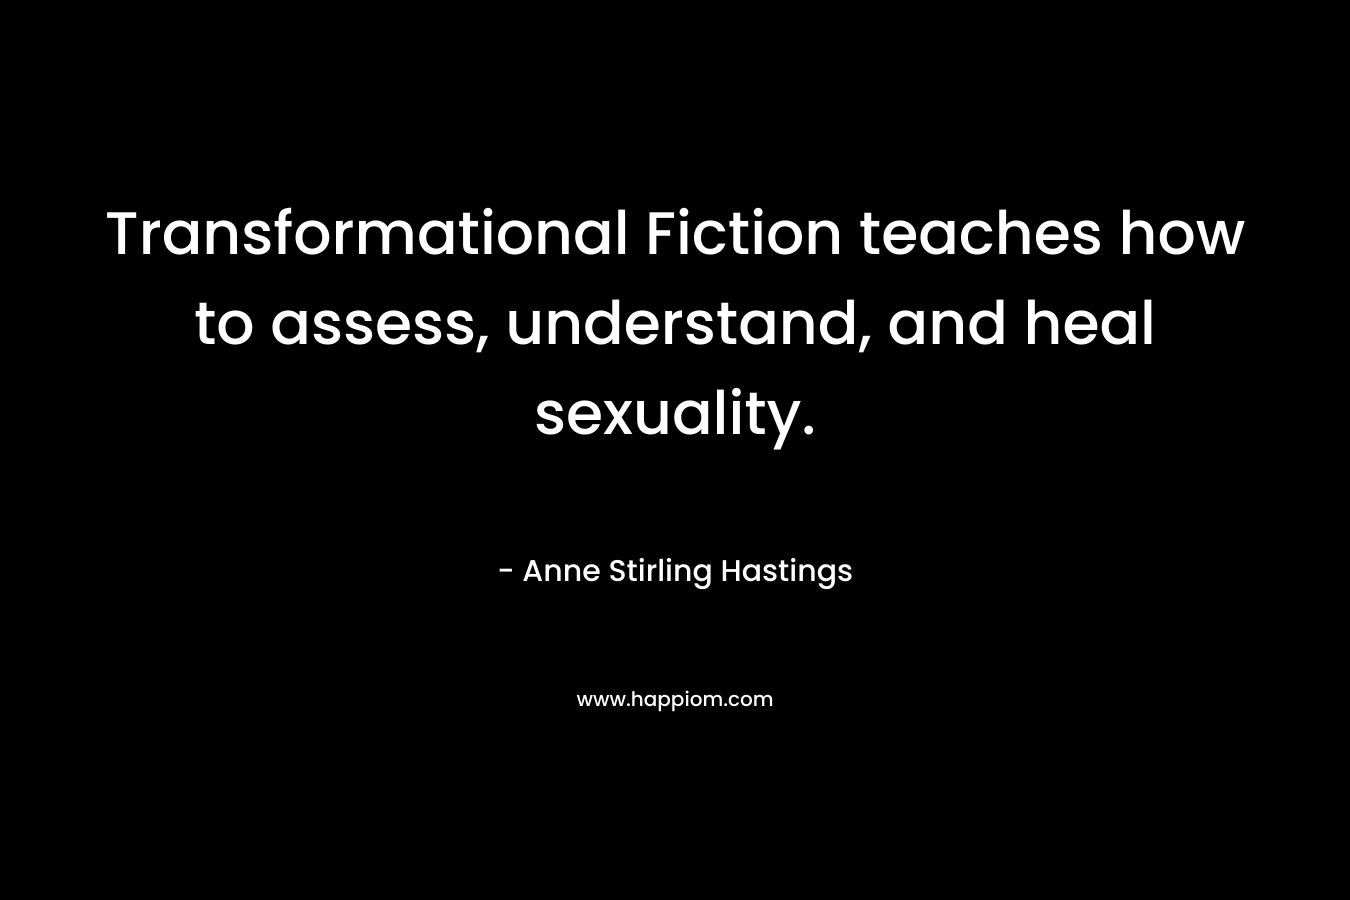 Transformational Fiction teaches how to assess, understand, and heal sexuality.